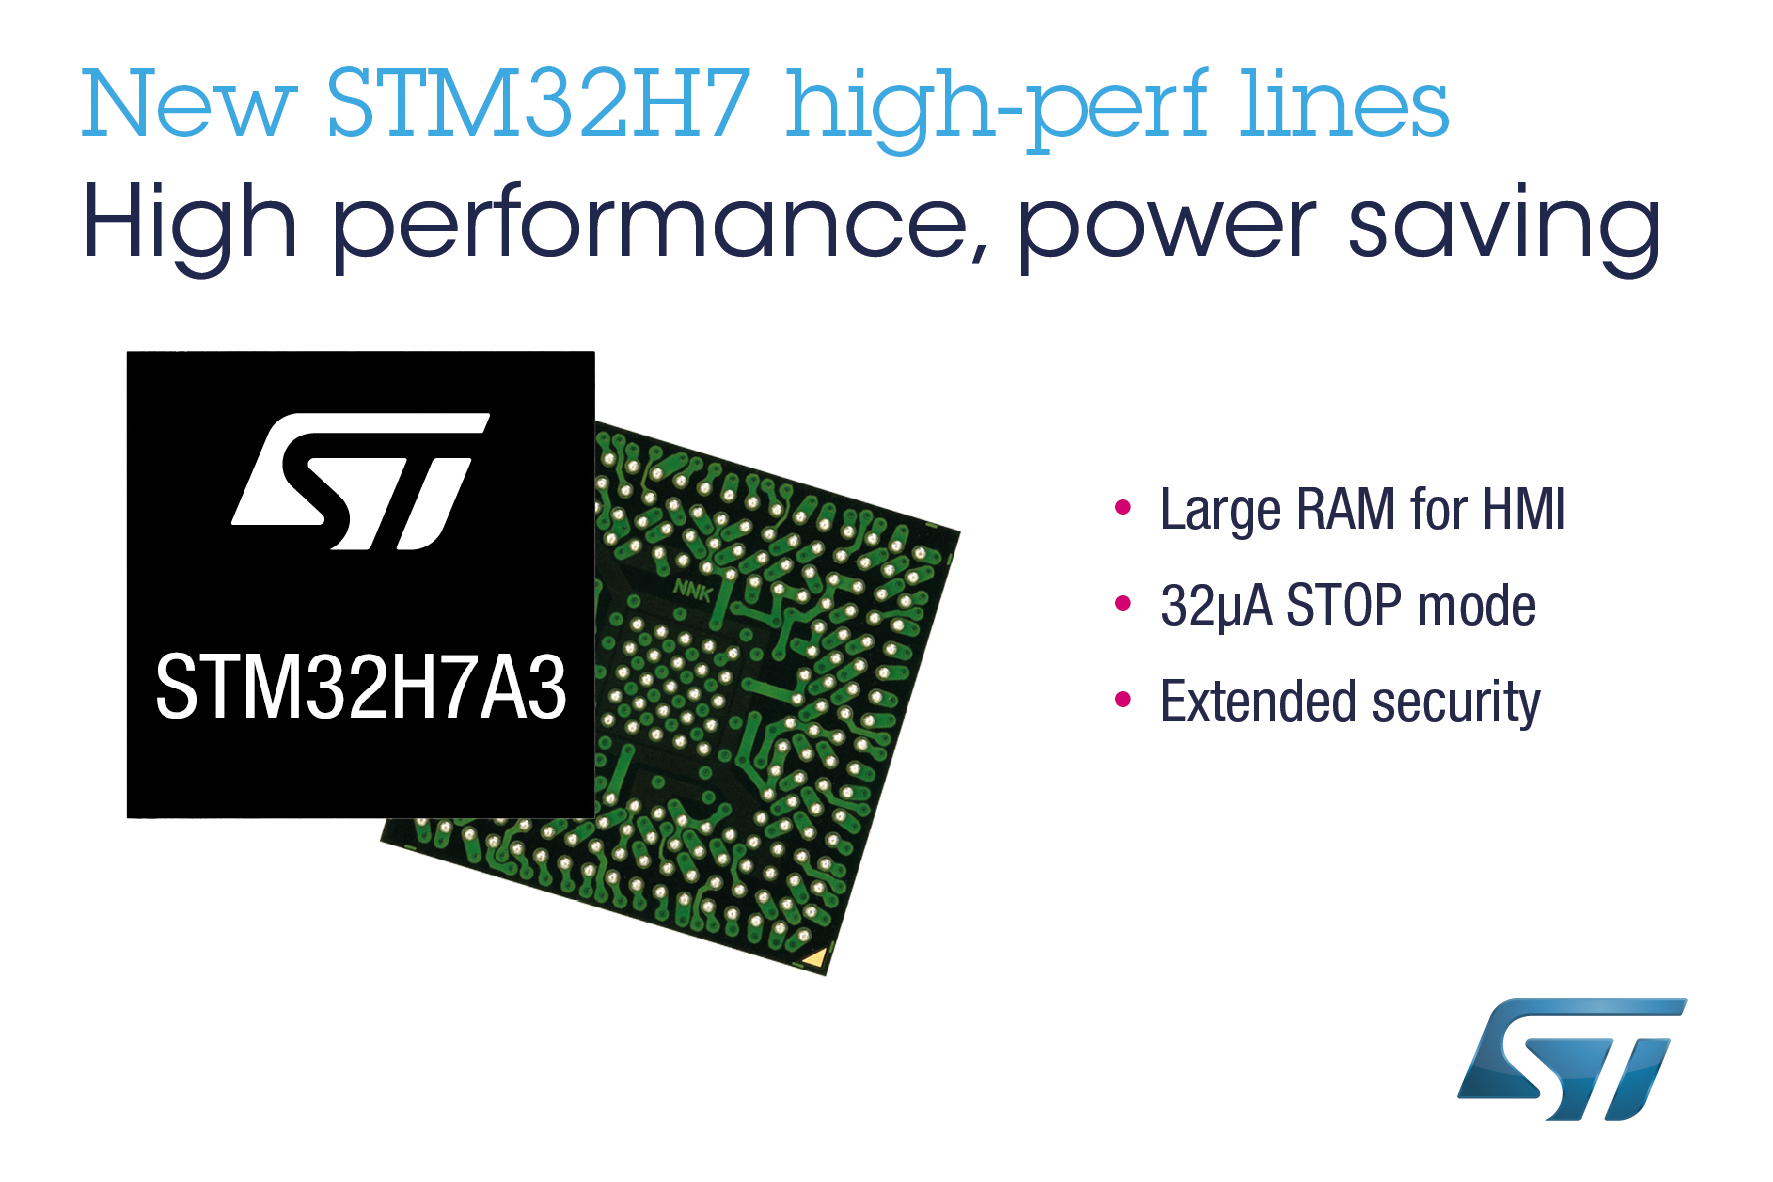 STMicroelectronics Blends Performance, Integration and Efficiency for Smart Devices in New STM32H7 Product Lines